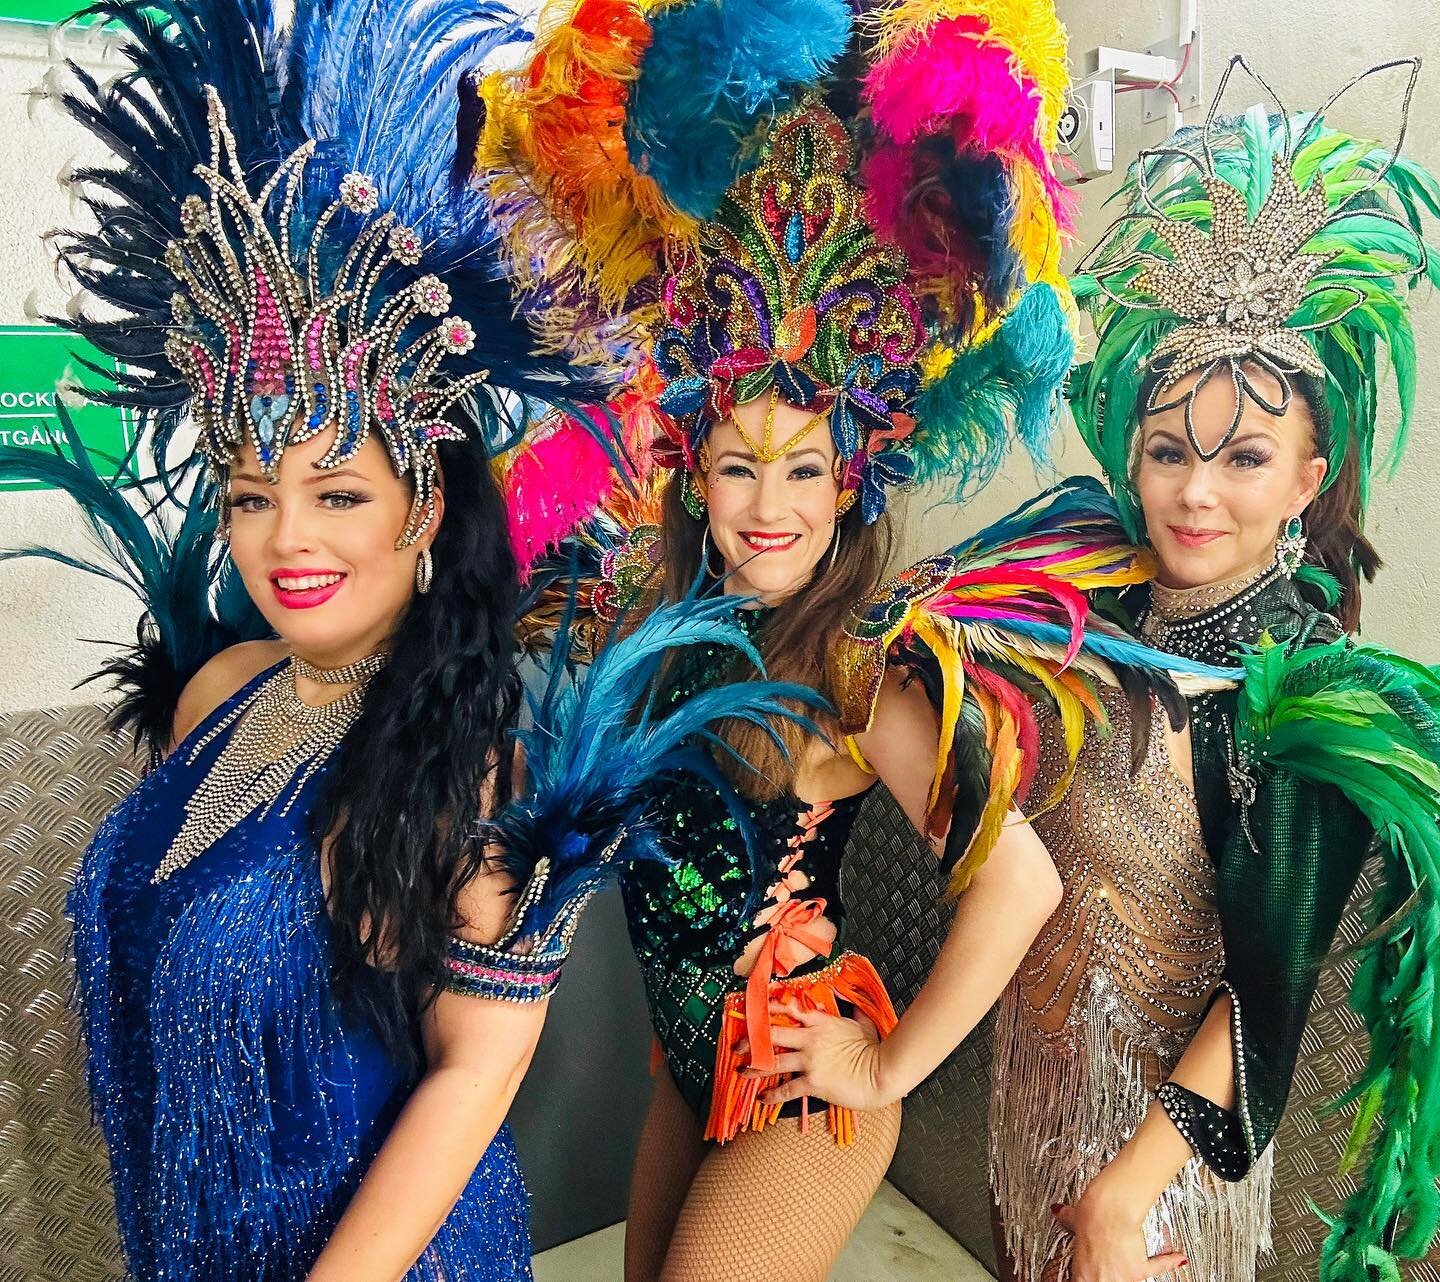 Fiesta de Carneval🎉 @boqueria.stockholm last night! if you missed it don&rsquo;t be sad! We perform tonight and tomorrow Friday aswell! Come and celebrate with us🫶🏻🎉💃🏻

#boqueria #fiestadecarneval #stockholm #stockholmrestaurant #samba #sambada